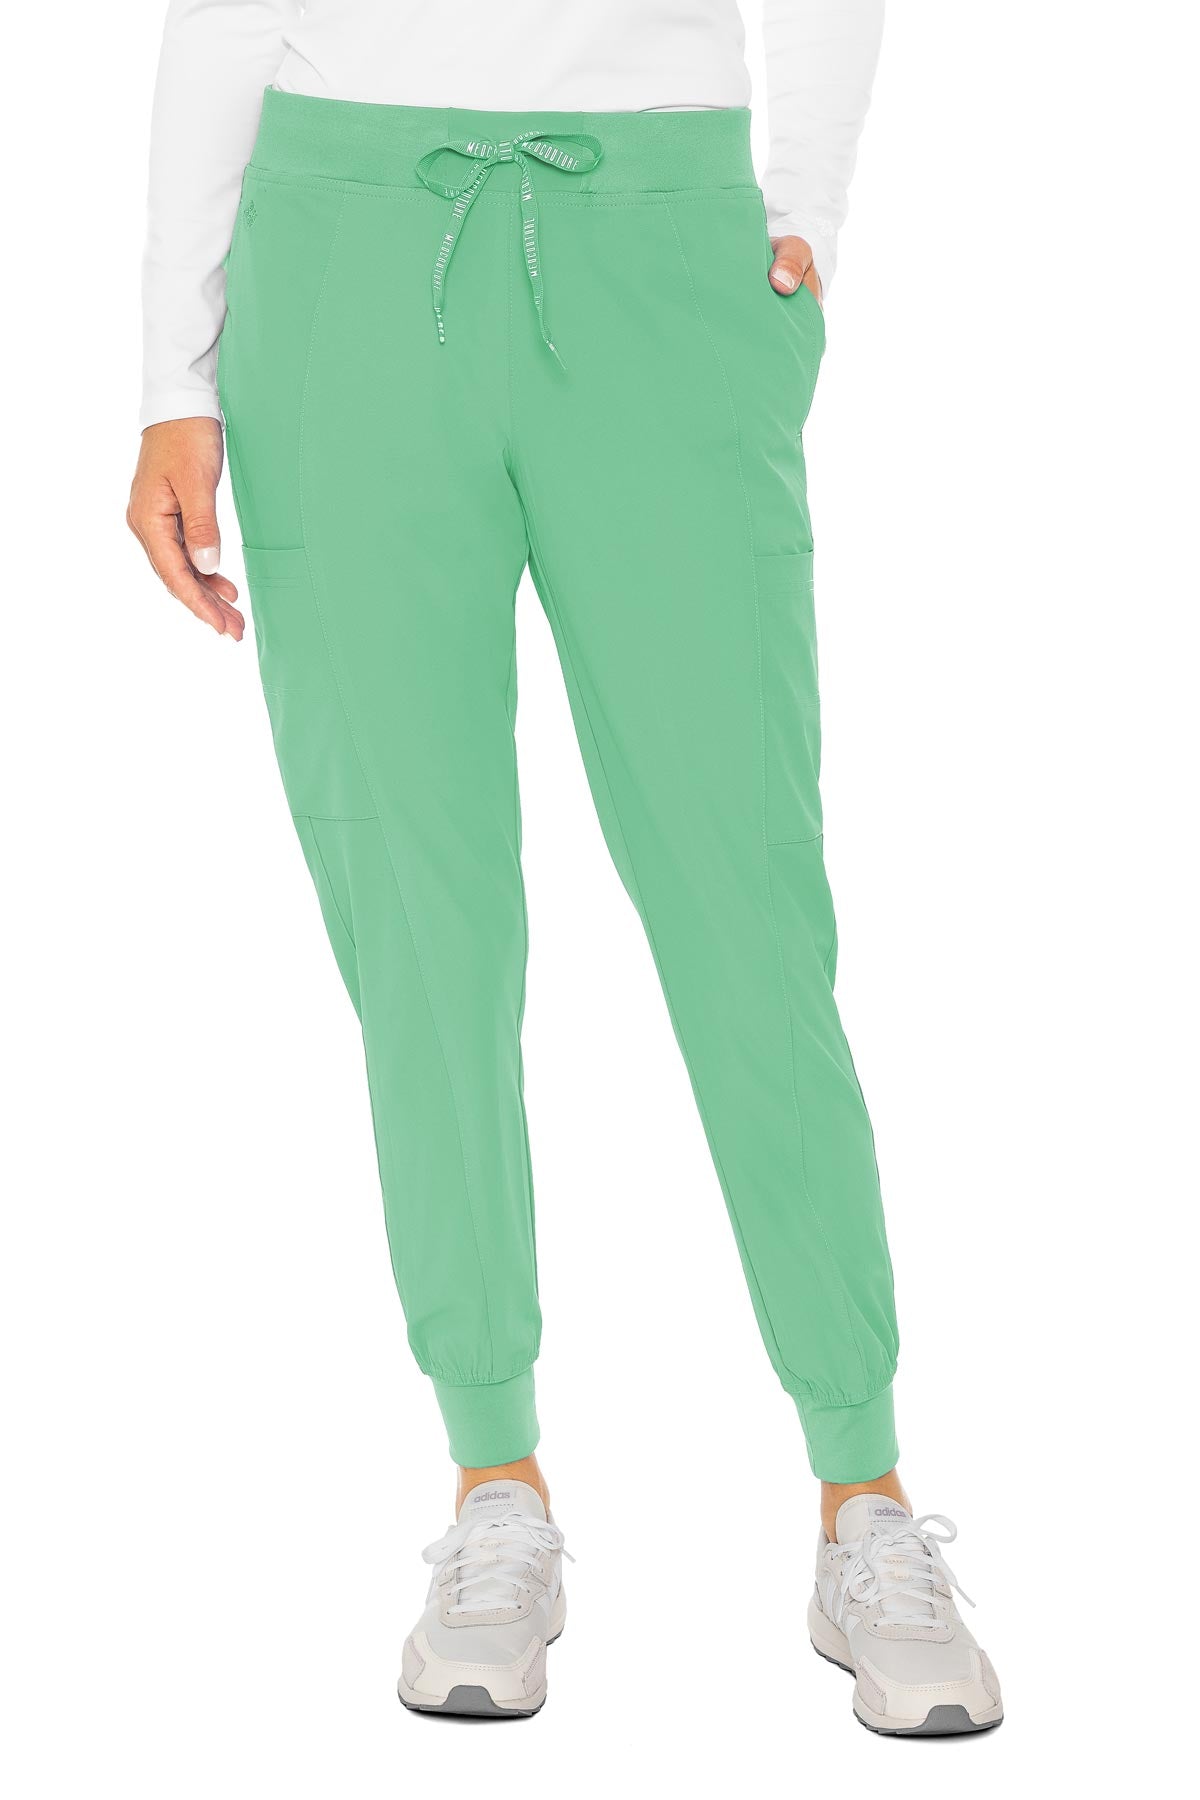 Med Couture Peaches Seamed Jogger Regular Length (XS-3XL)